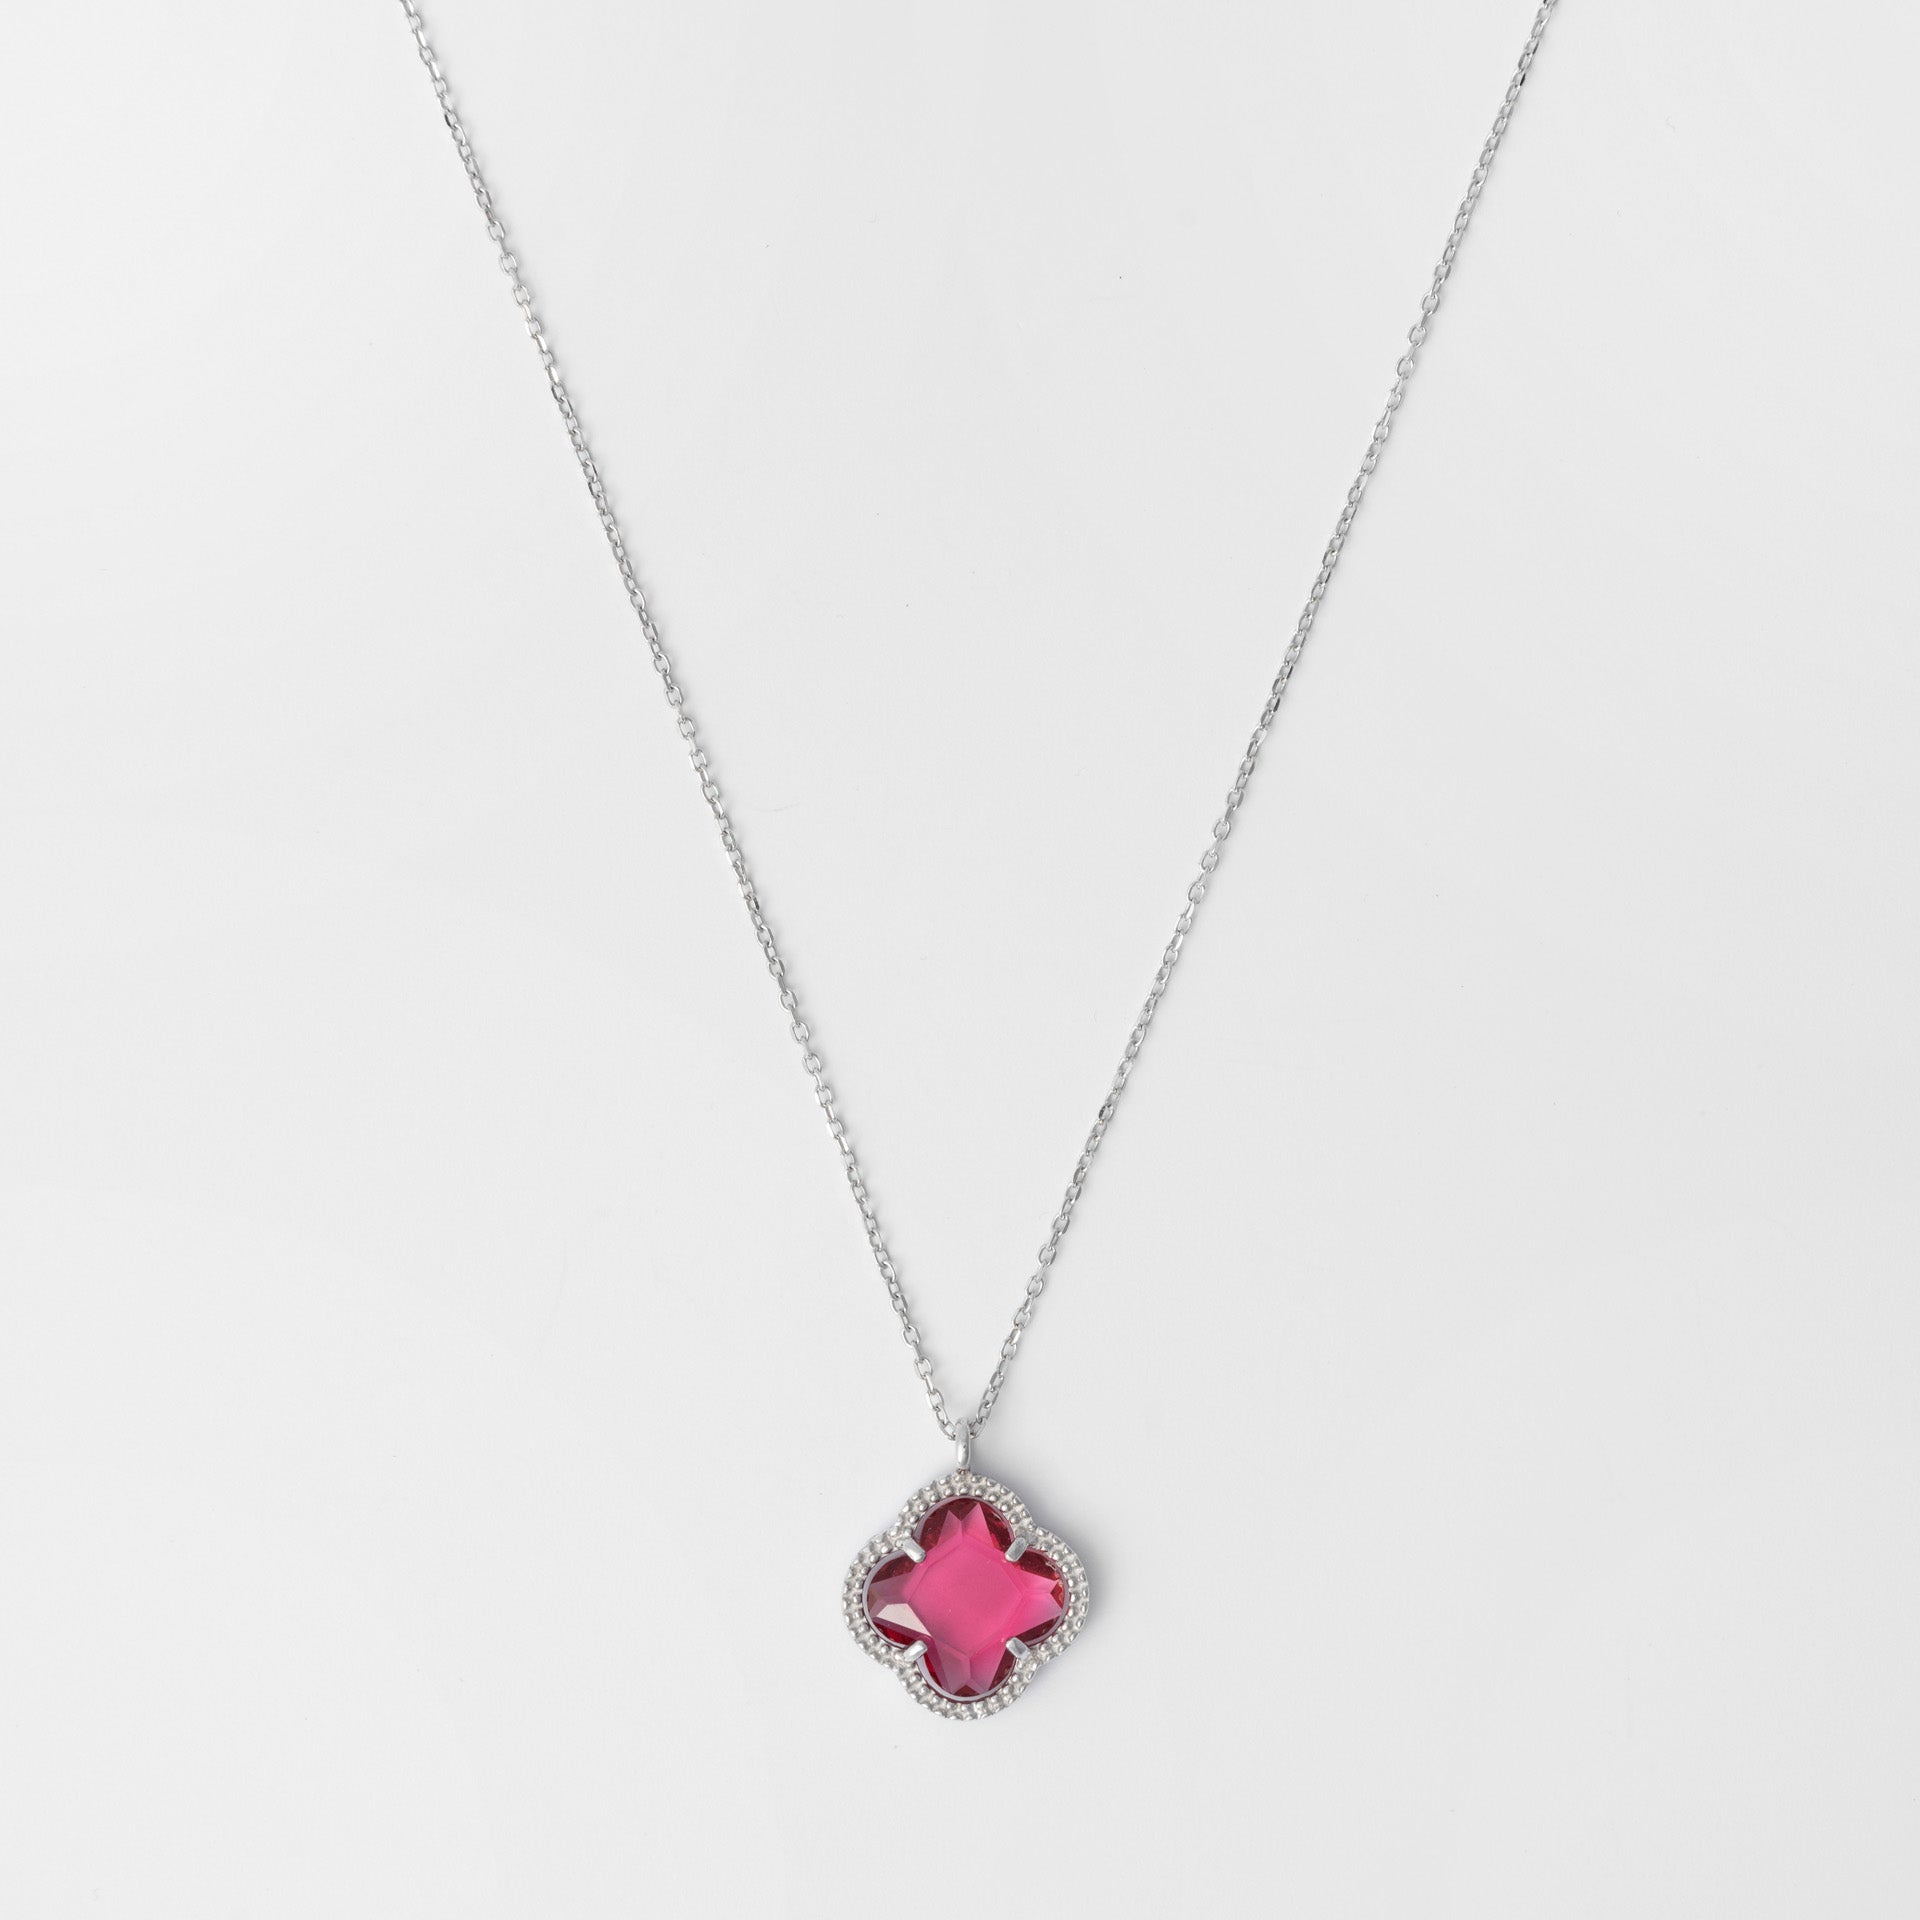 CLOVER GOLD NECKLACE WITH RED QUARTZ